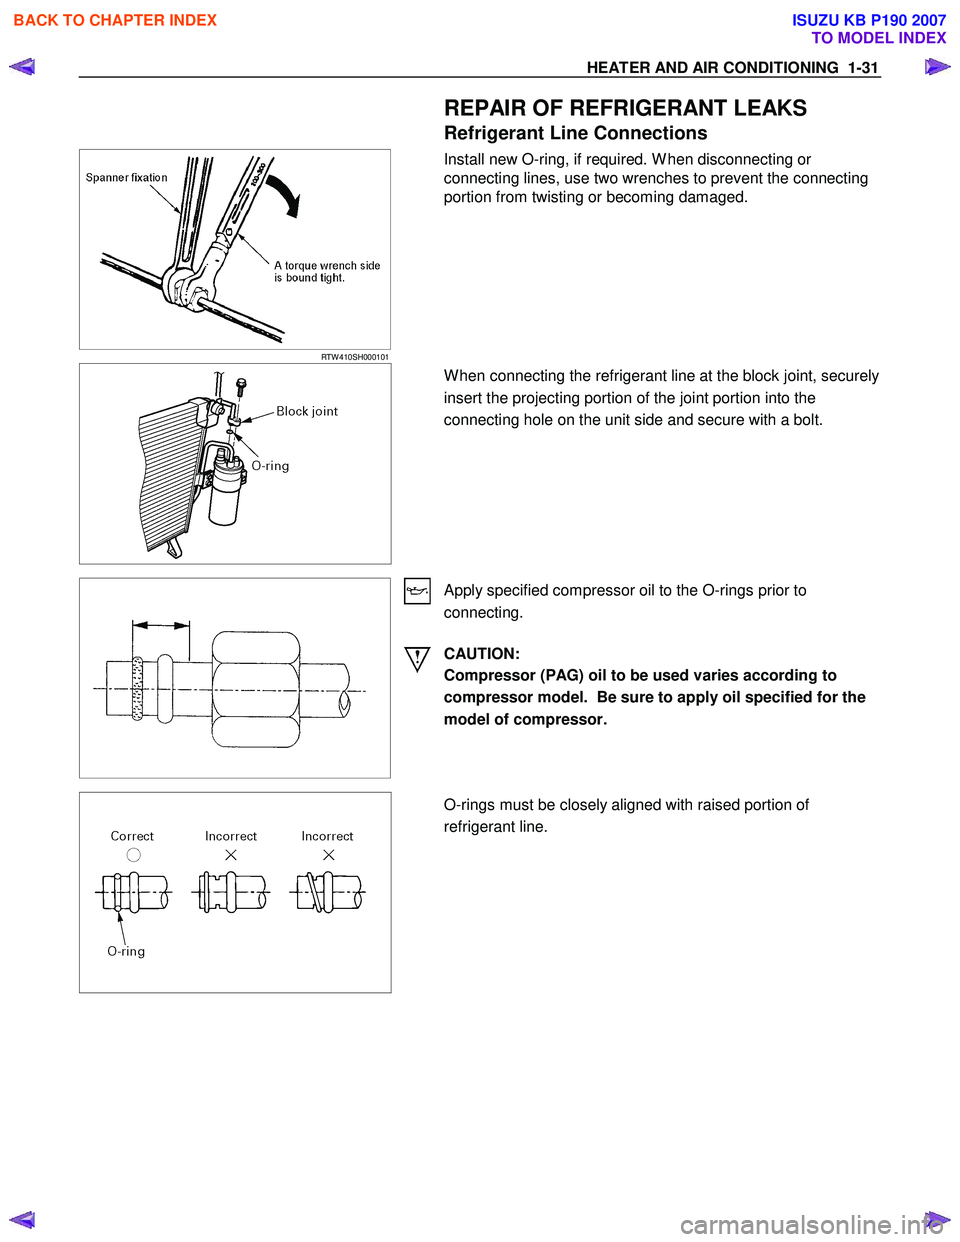 ISUZU KB P190 2007  Workshop Repair Manual HEATER AND AIR CONDITIONING  1-31 
    
 REPAIR OF REFRIGERANT LEAKS 
Refrigerant Line Connections 
   
 
 
RTW 410SH000101 
  Install new O-ring, if required. W hen disconnecting or  
connecting line